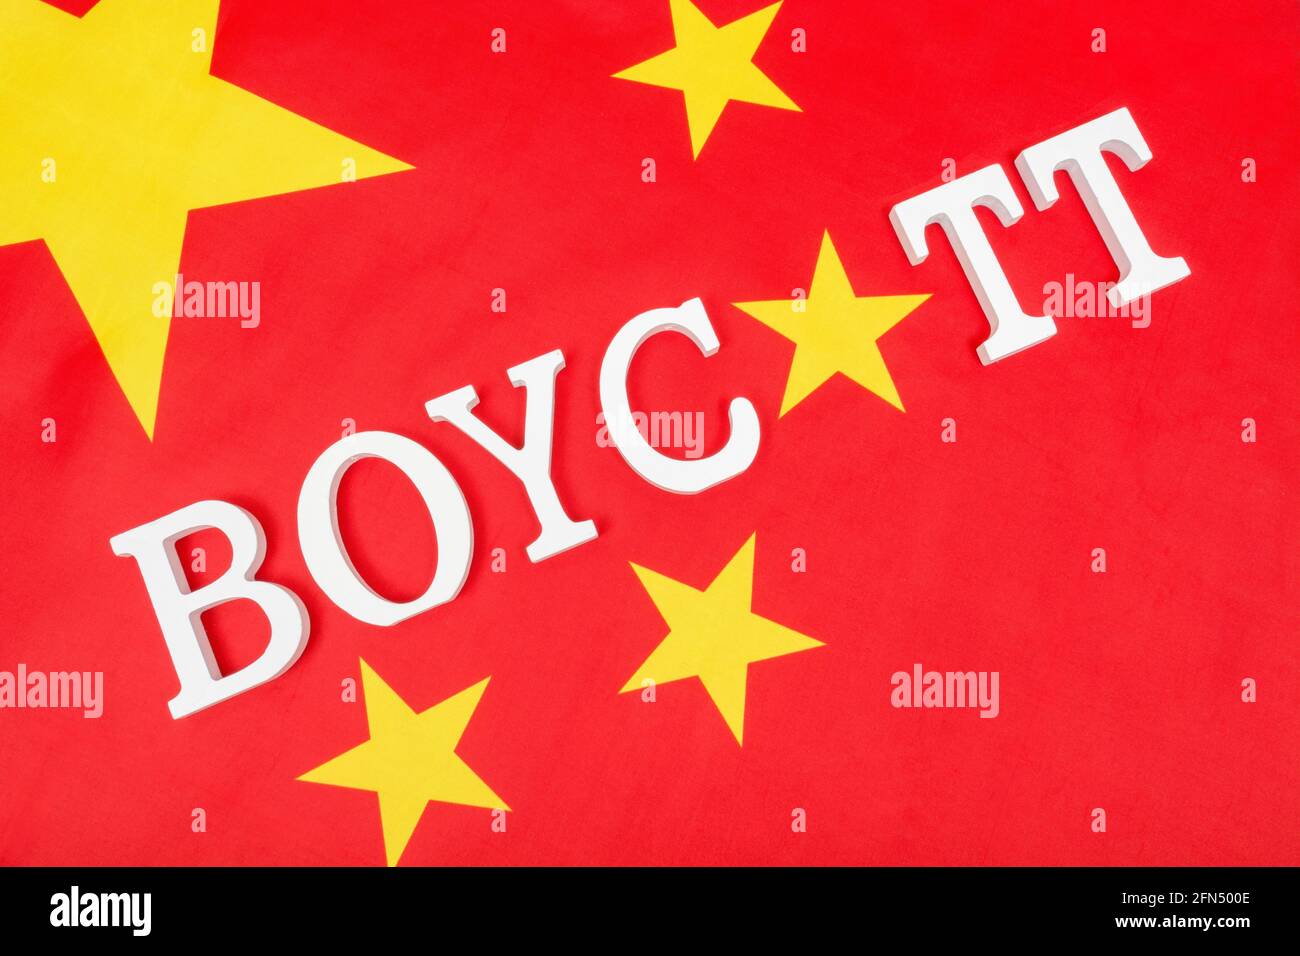 Chinese flag with letters spelling Boycott. For ban on Chinese products & goods, boycotting 2022 Winter Olympics, China boycott of Taiwanese products. Stock Photo